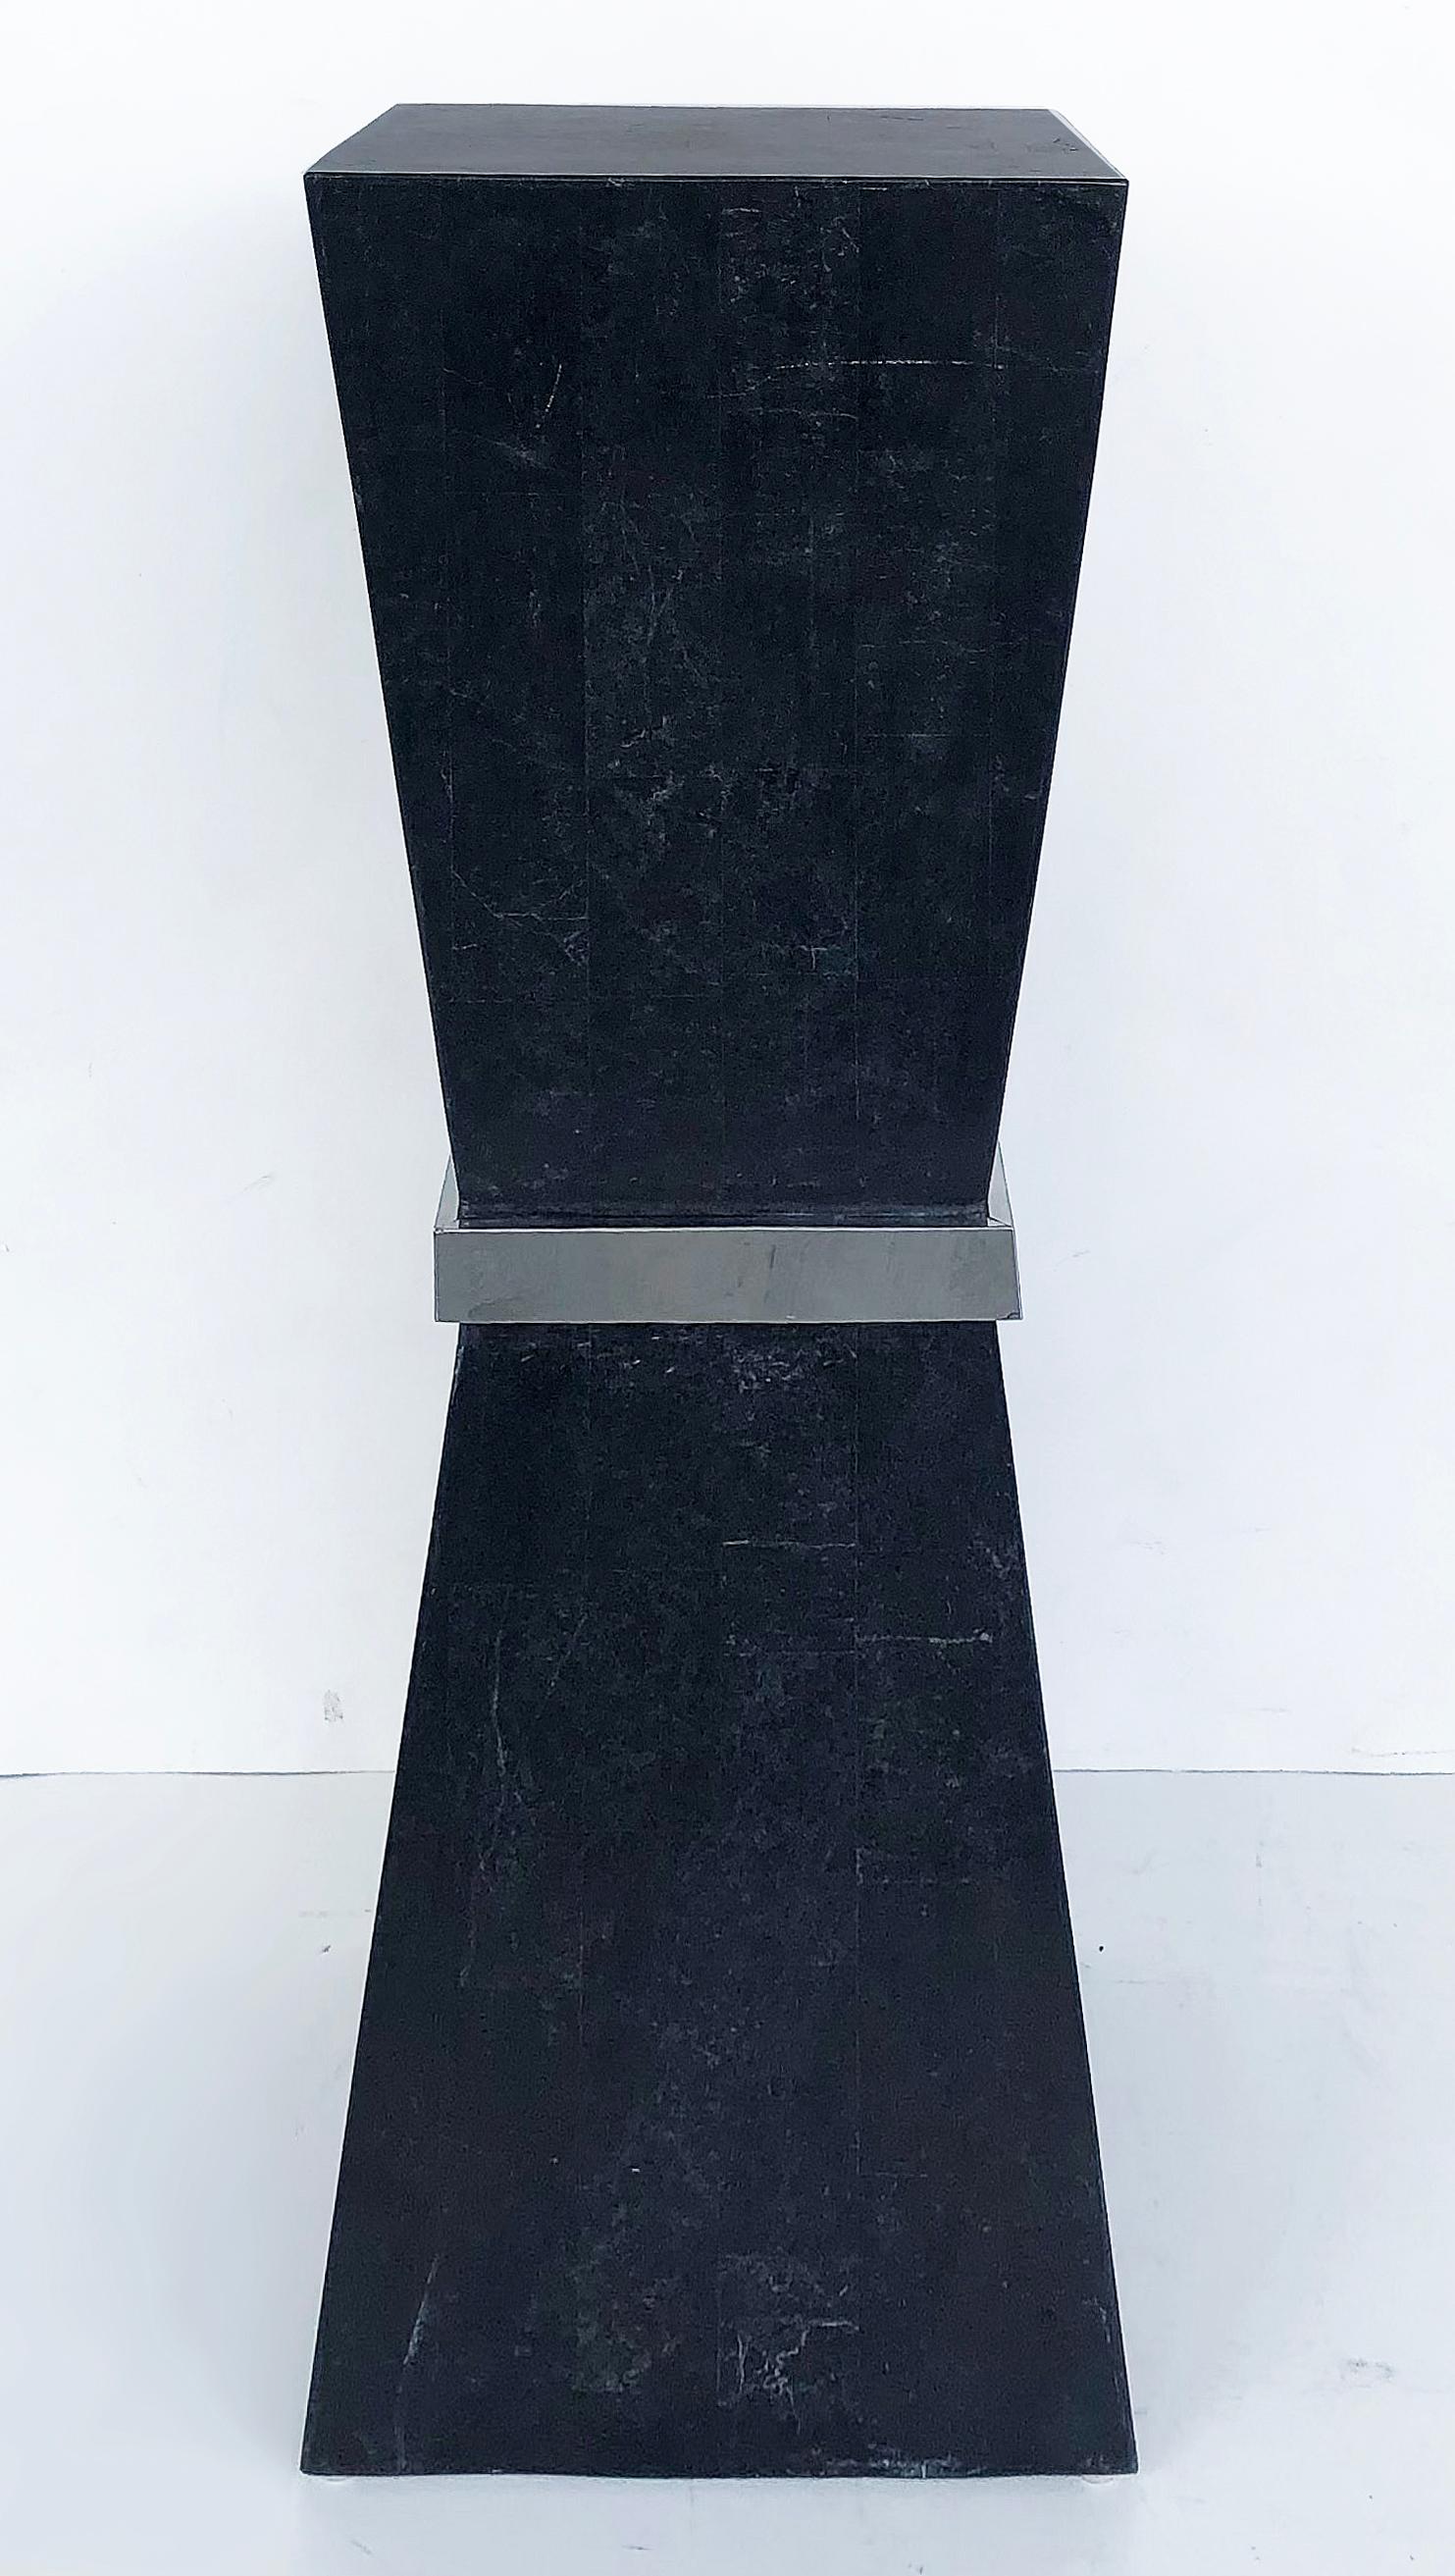 Marquis Collection of Beverly Hills stone pedestal with nickel band.

Offered for sale is a contemporary black tessellated stone veneer pedestal with a polished nickel band. The pedestal retains a label underneath which identifies it as a Marquis